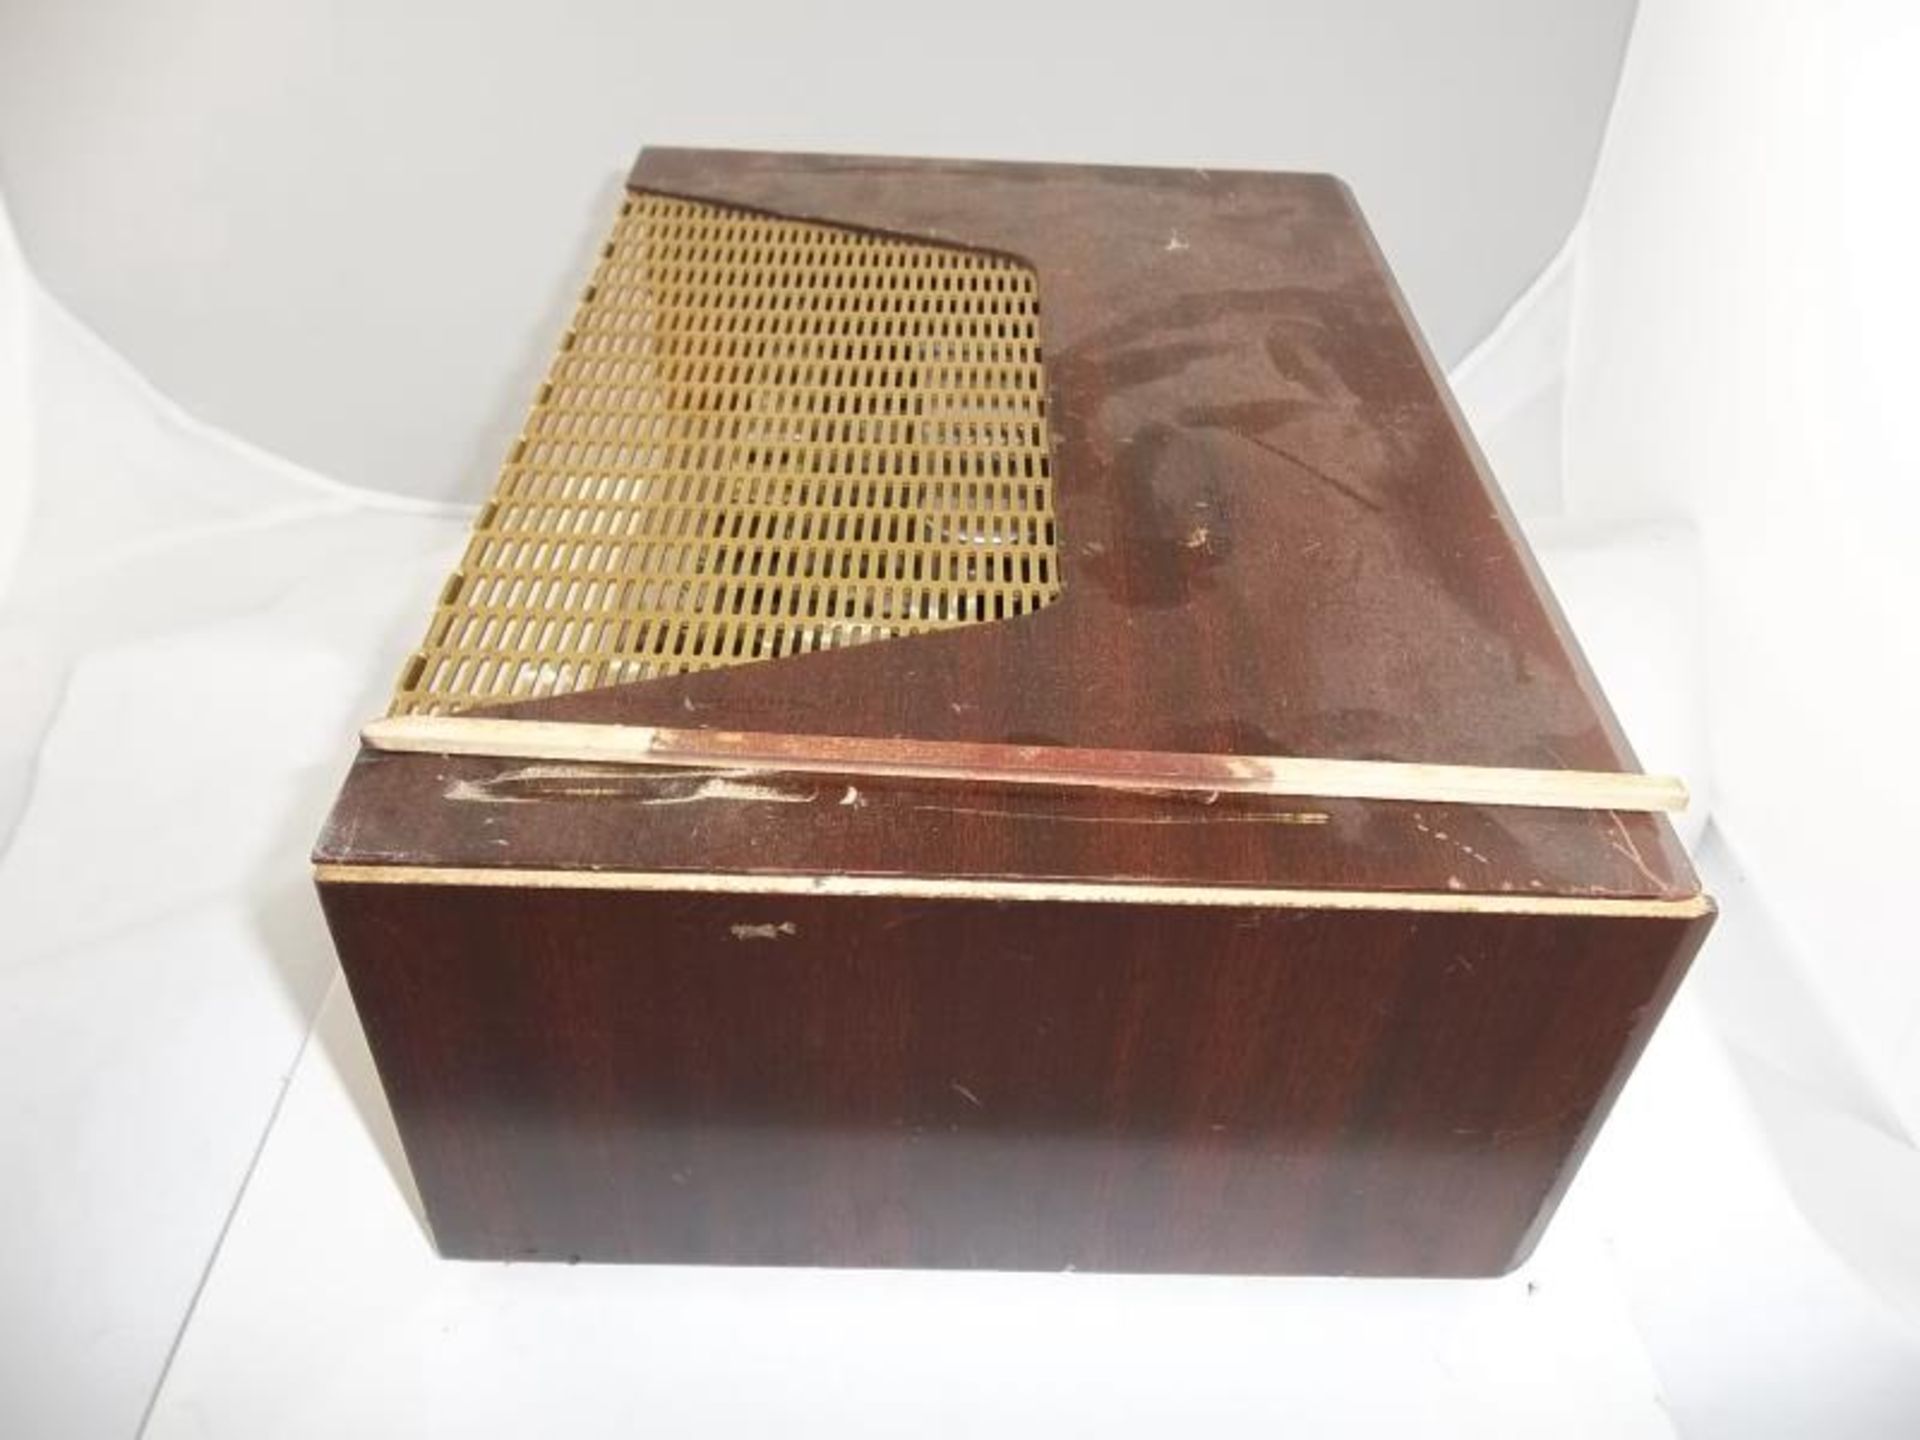 Scott FM Tuner type 310-B, s#26641, wood case broken and scratched, not tested - Image 5 of 6